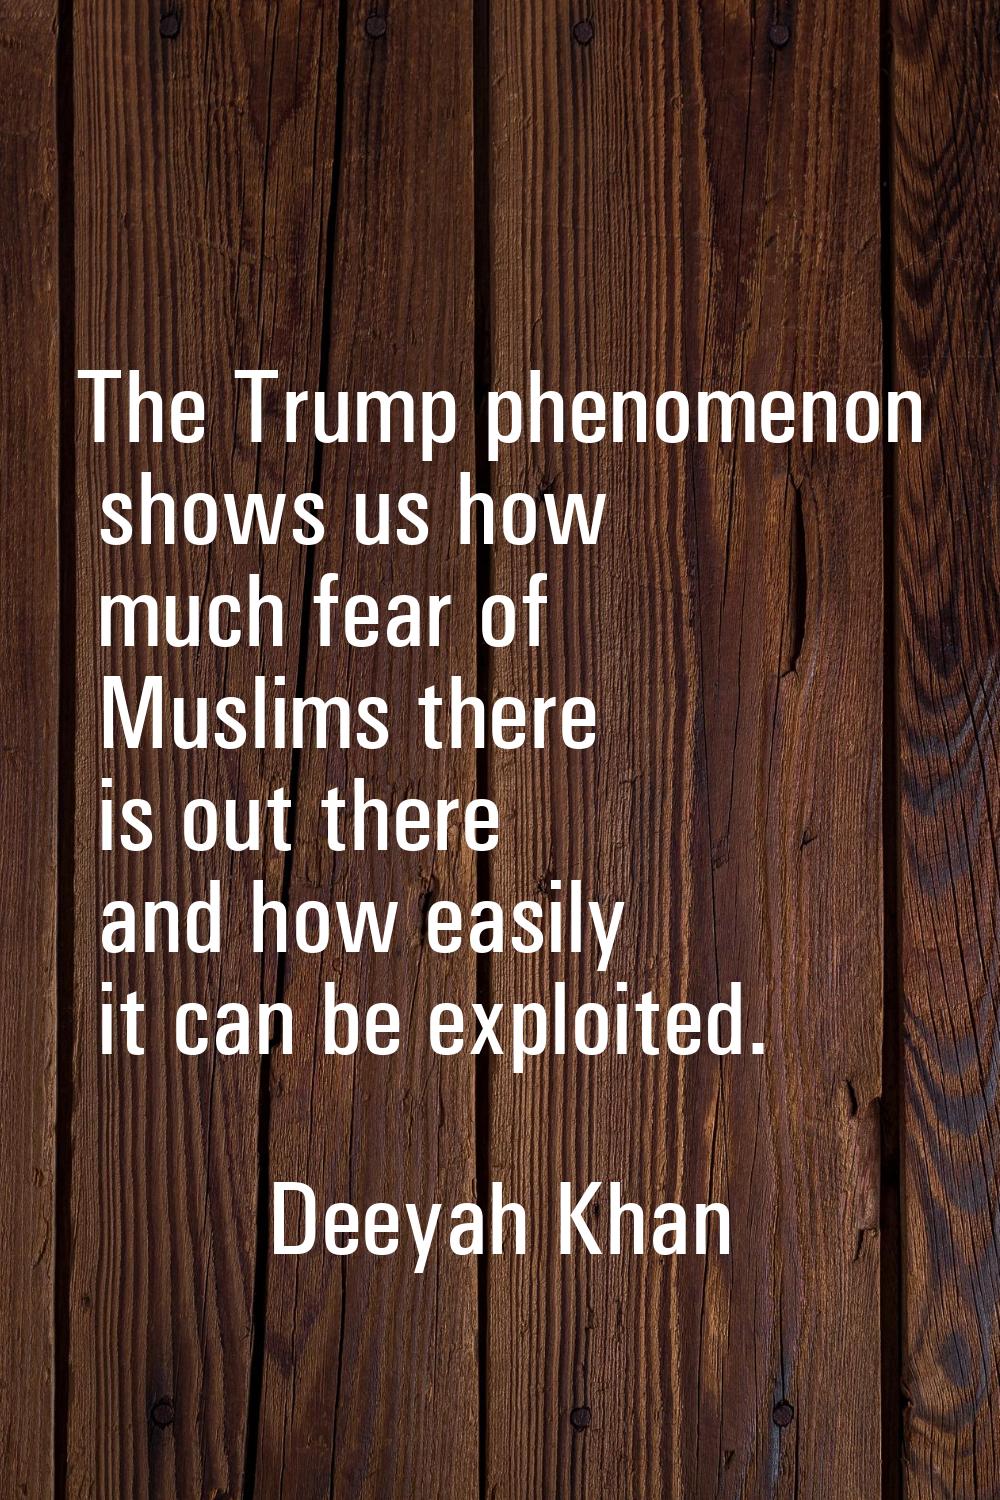 The Trump phenomenon shows us how much fear of Muslims there is out there and how easily it can be 